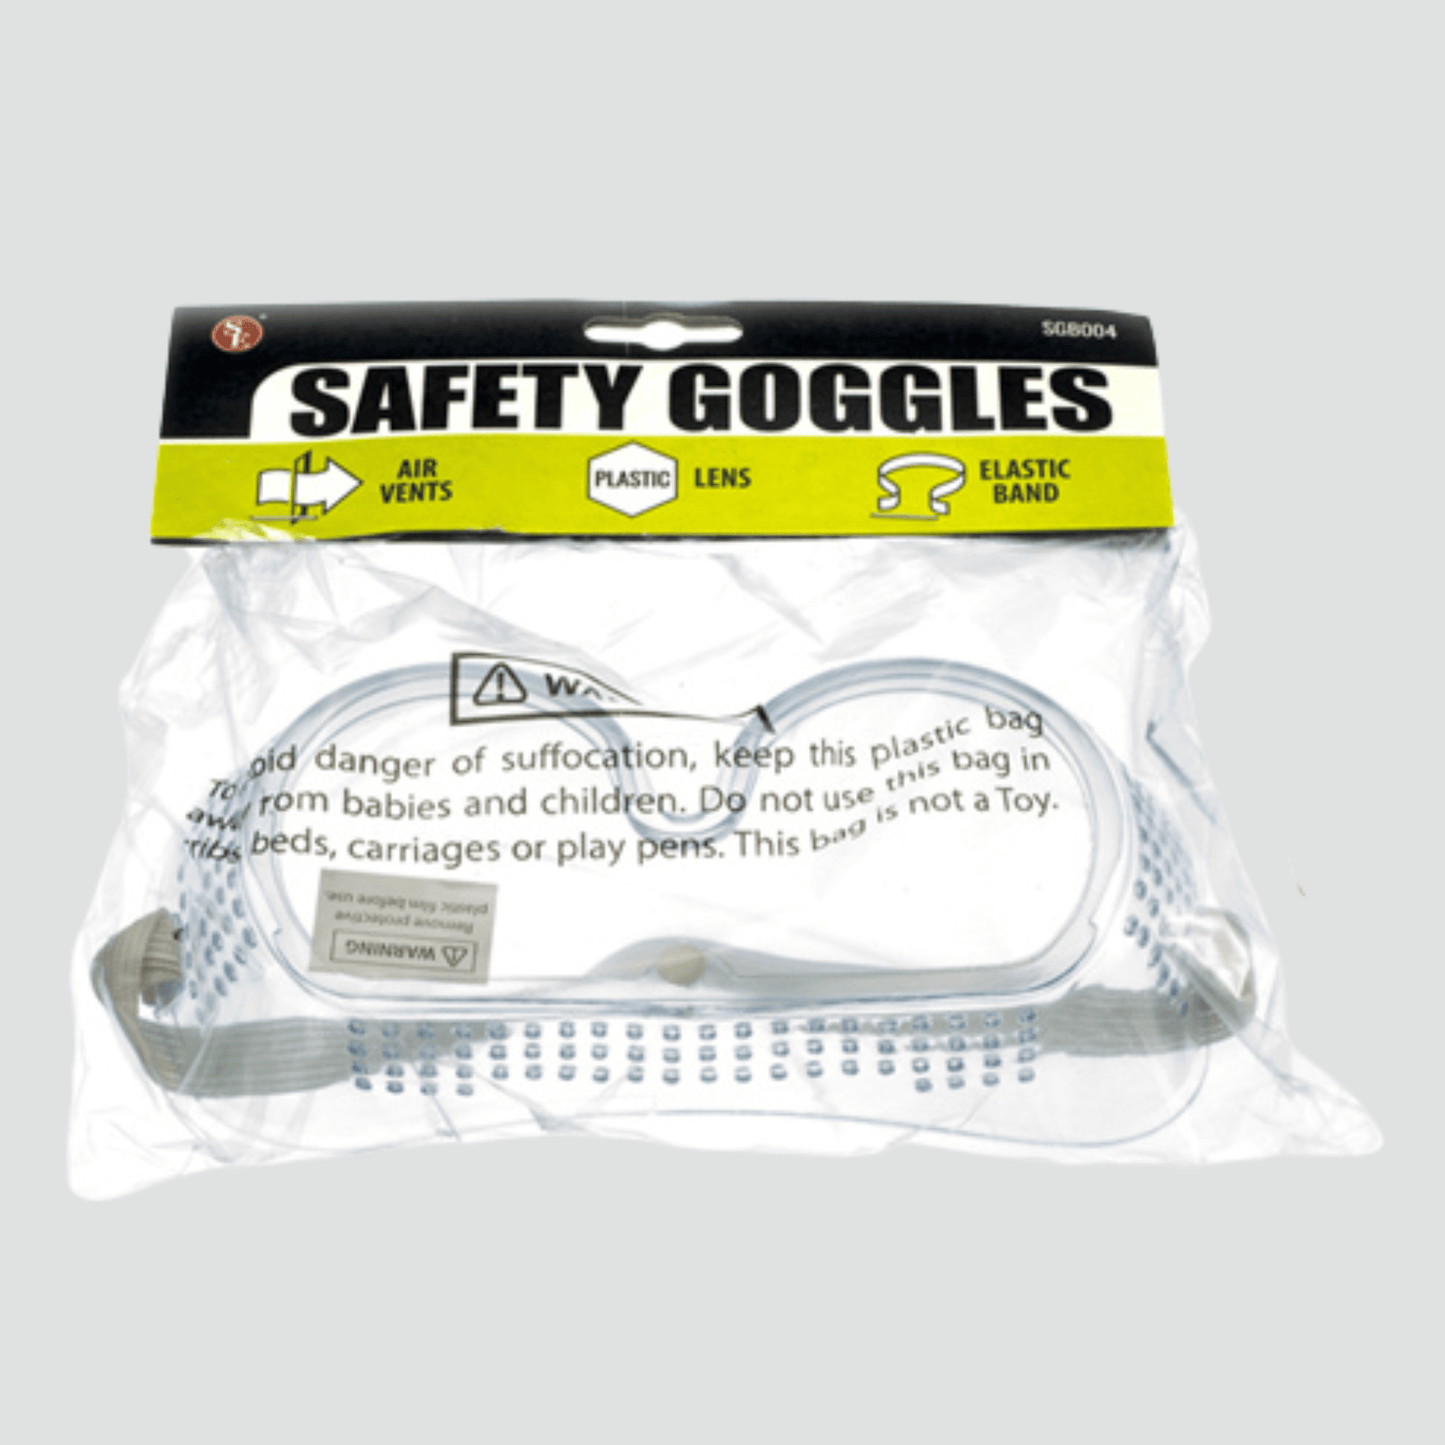 Plastic clear, safety goggles in their package.